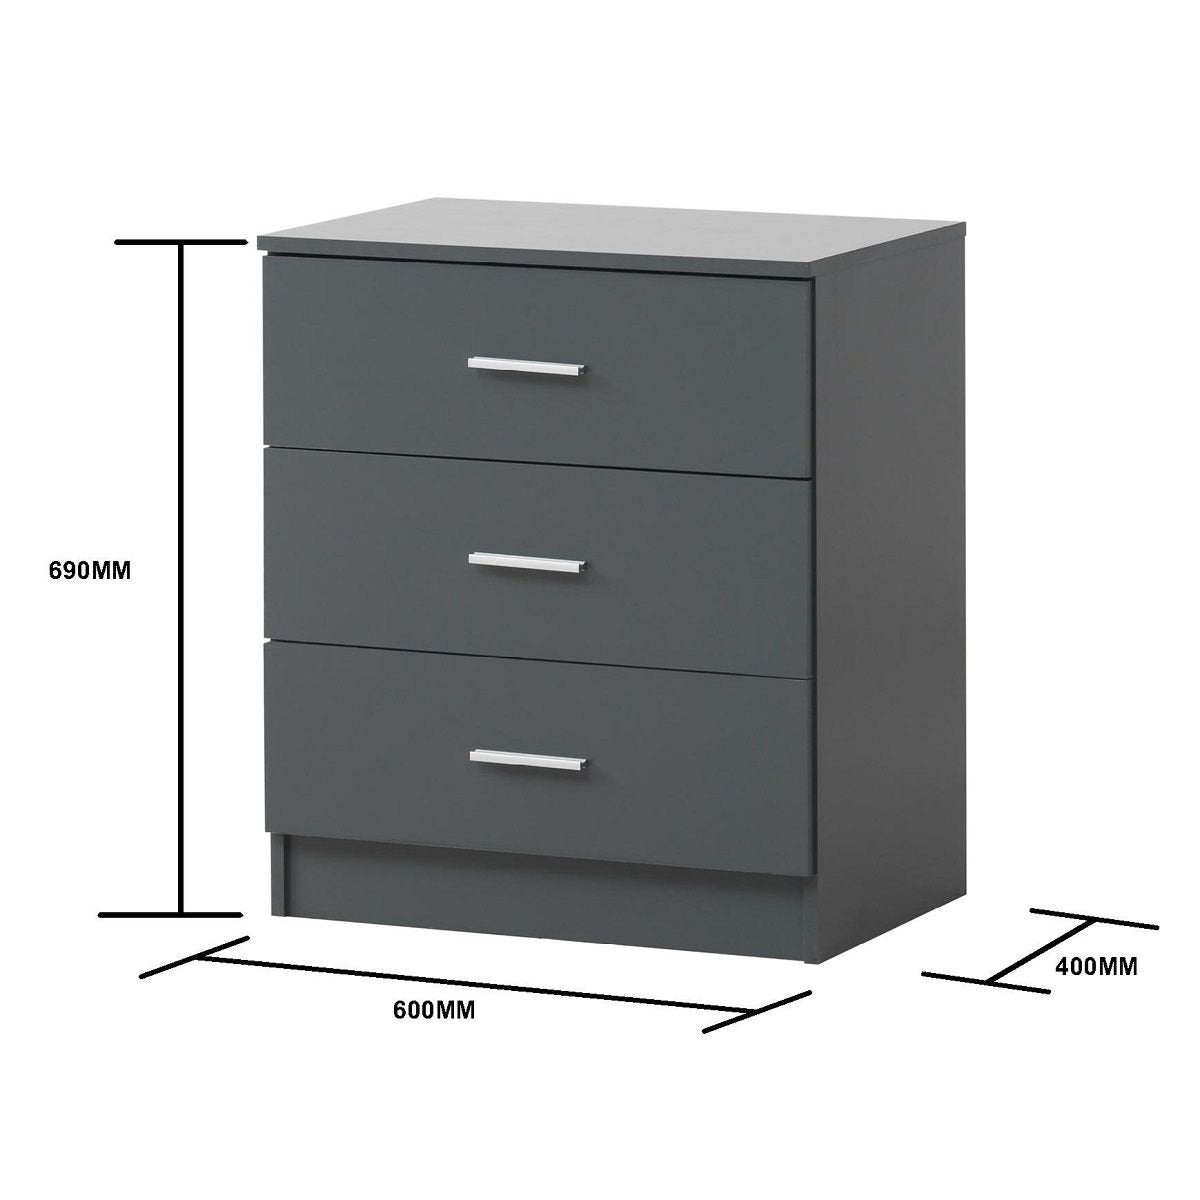 Staten Grey Bedroom Set Double Wardrobe, Chest of Drawers and Bedside Table